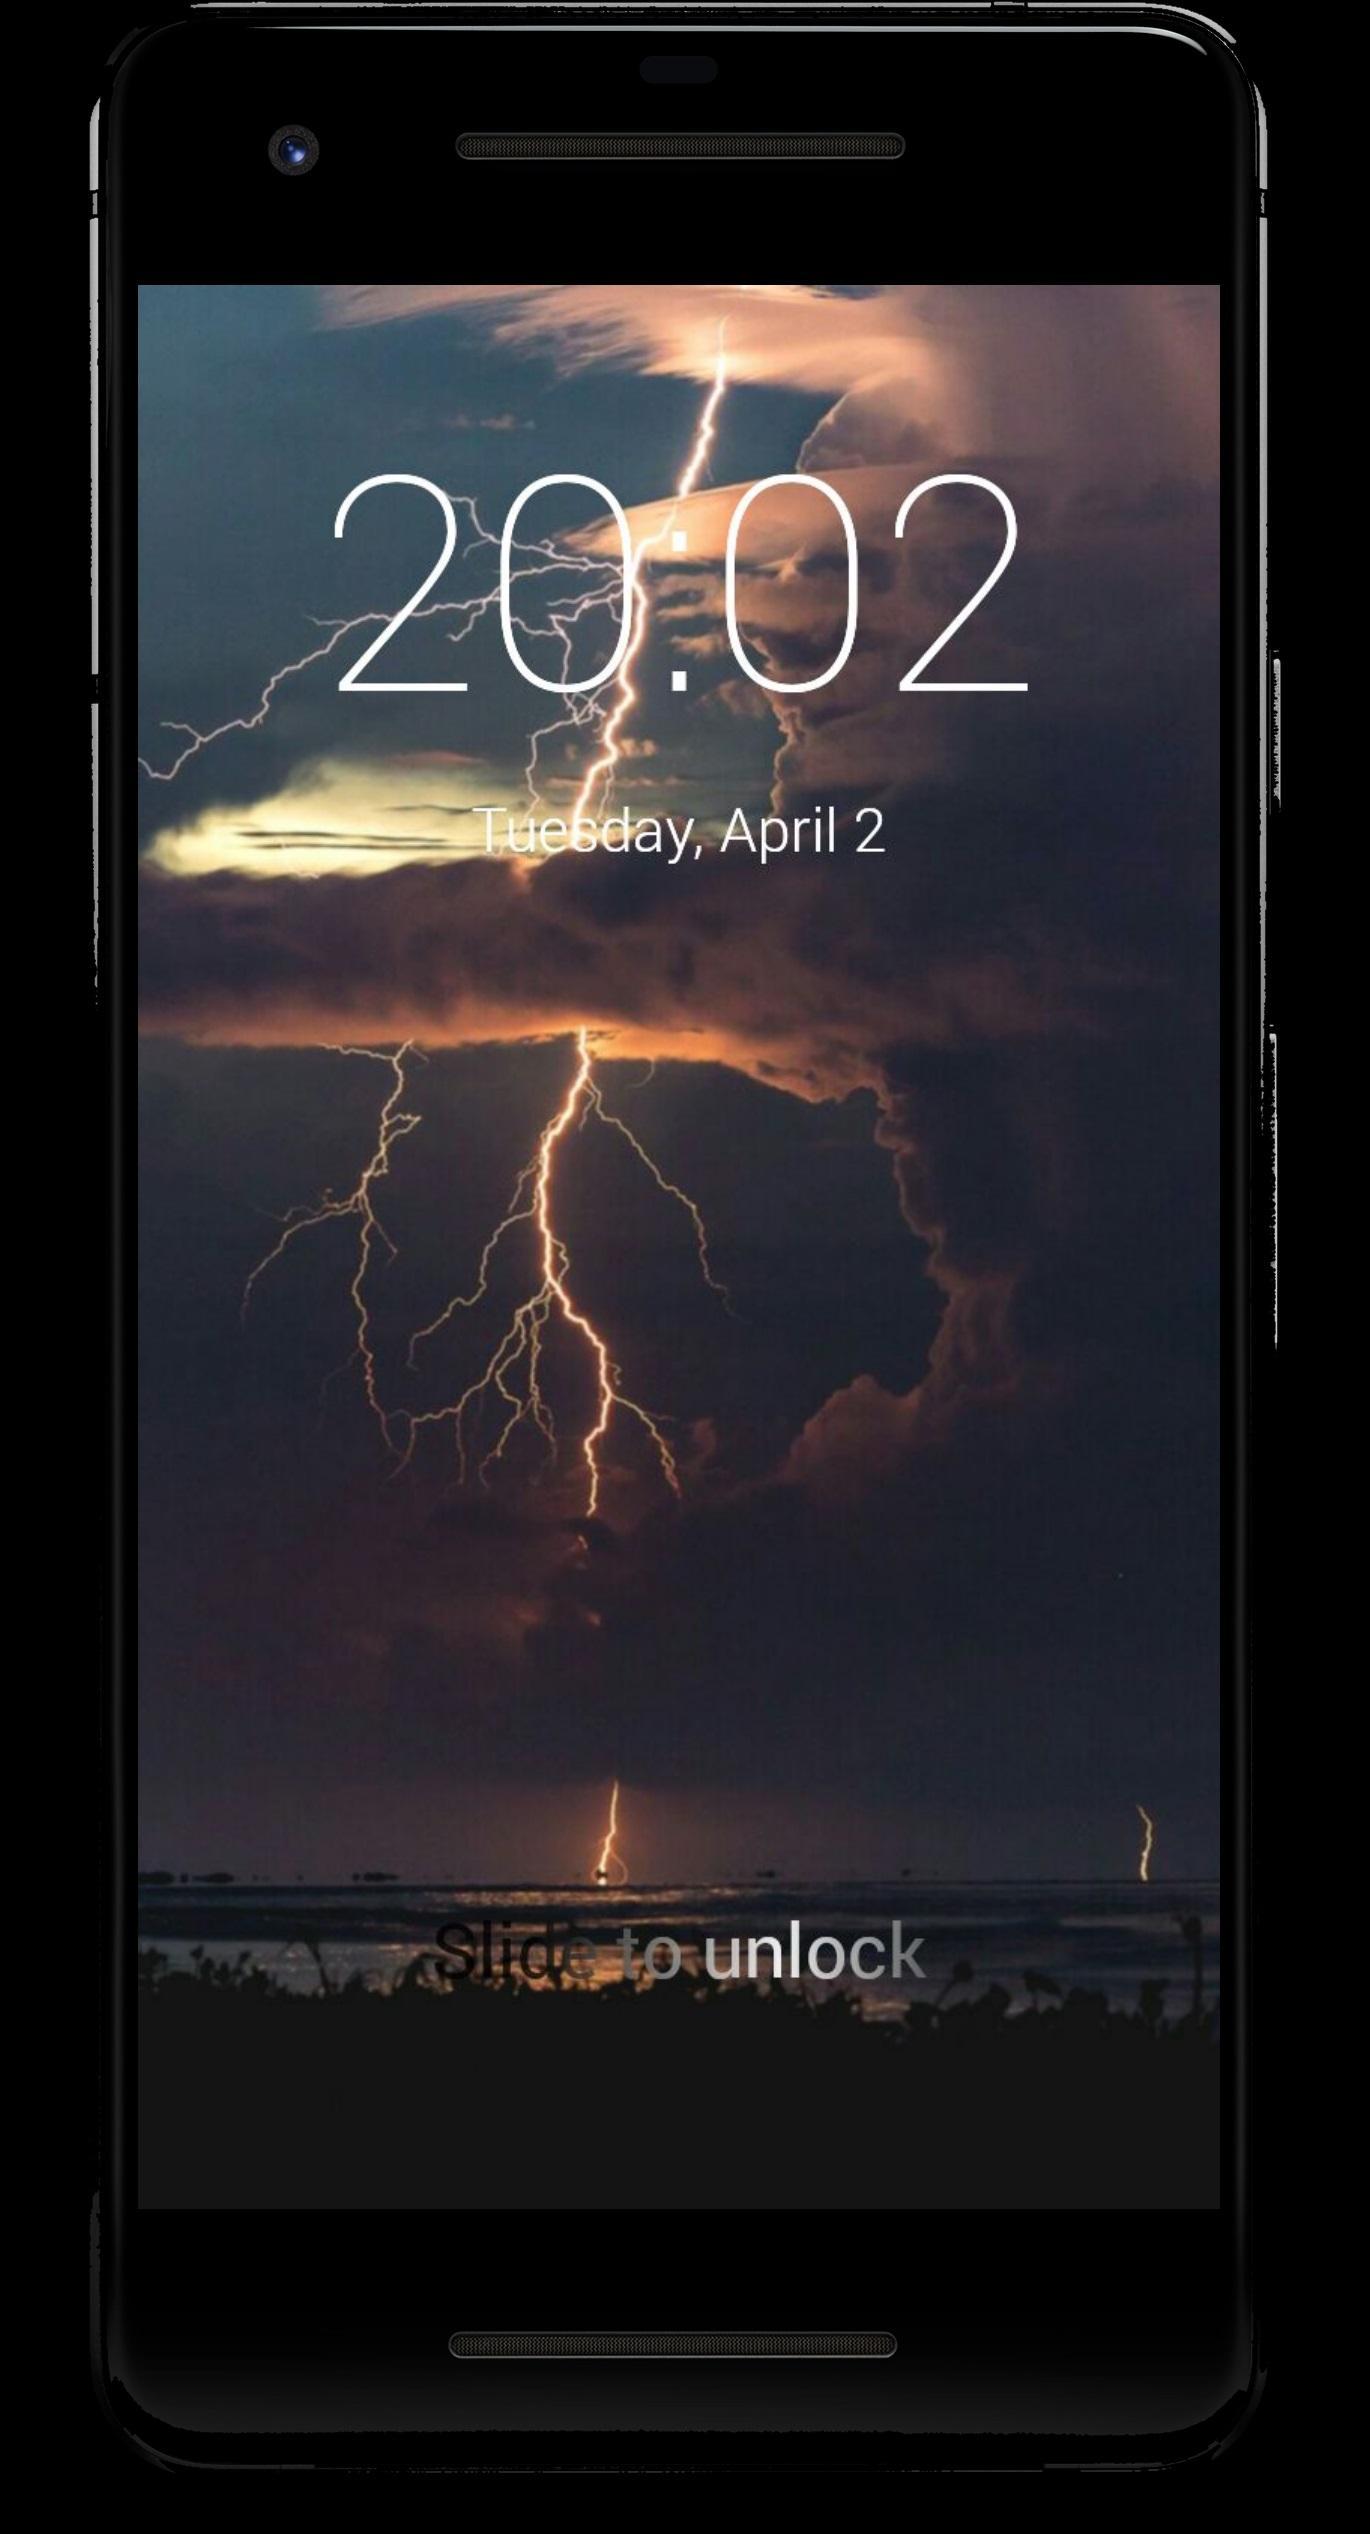 Storm Screen for Android - APK Download